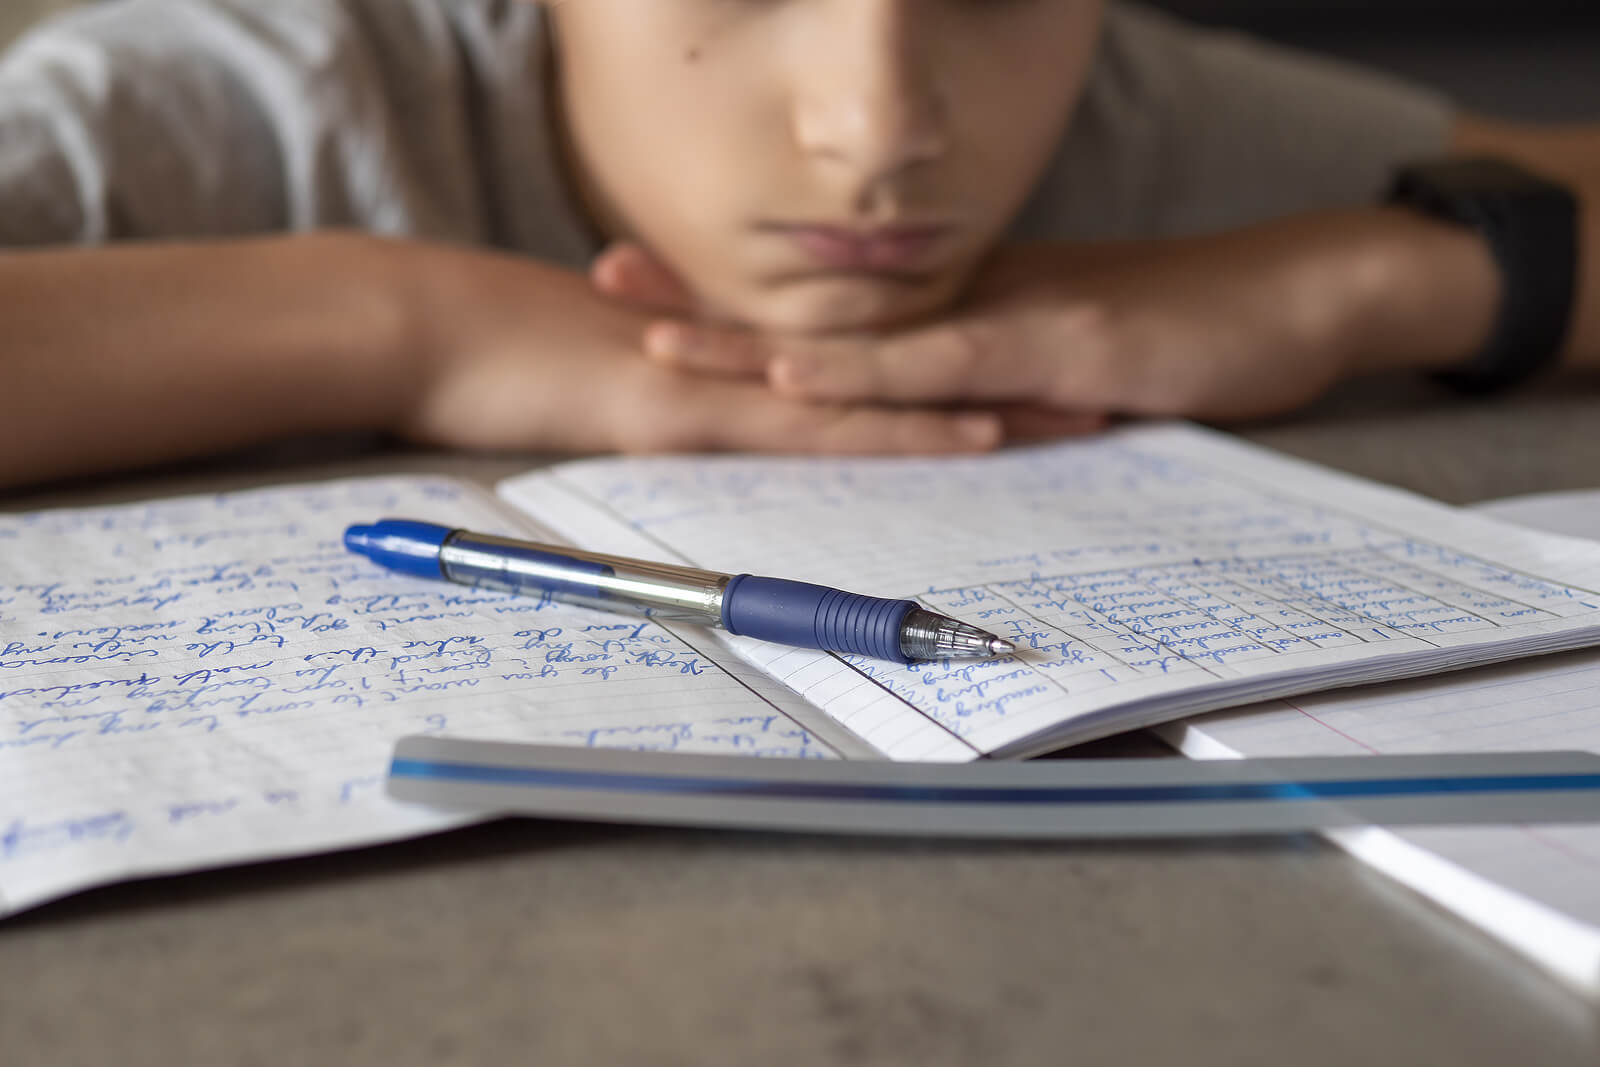 A child looking down at a testing booklet. Psychoeducational testing could be what your child needs. Contact us today.